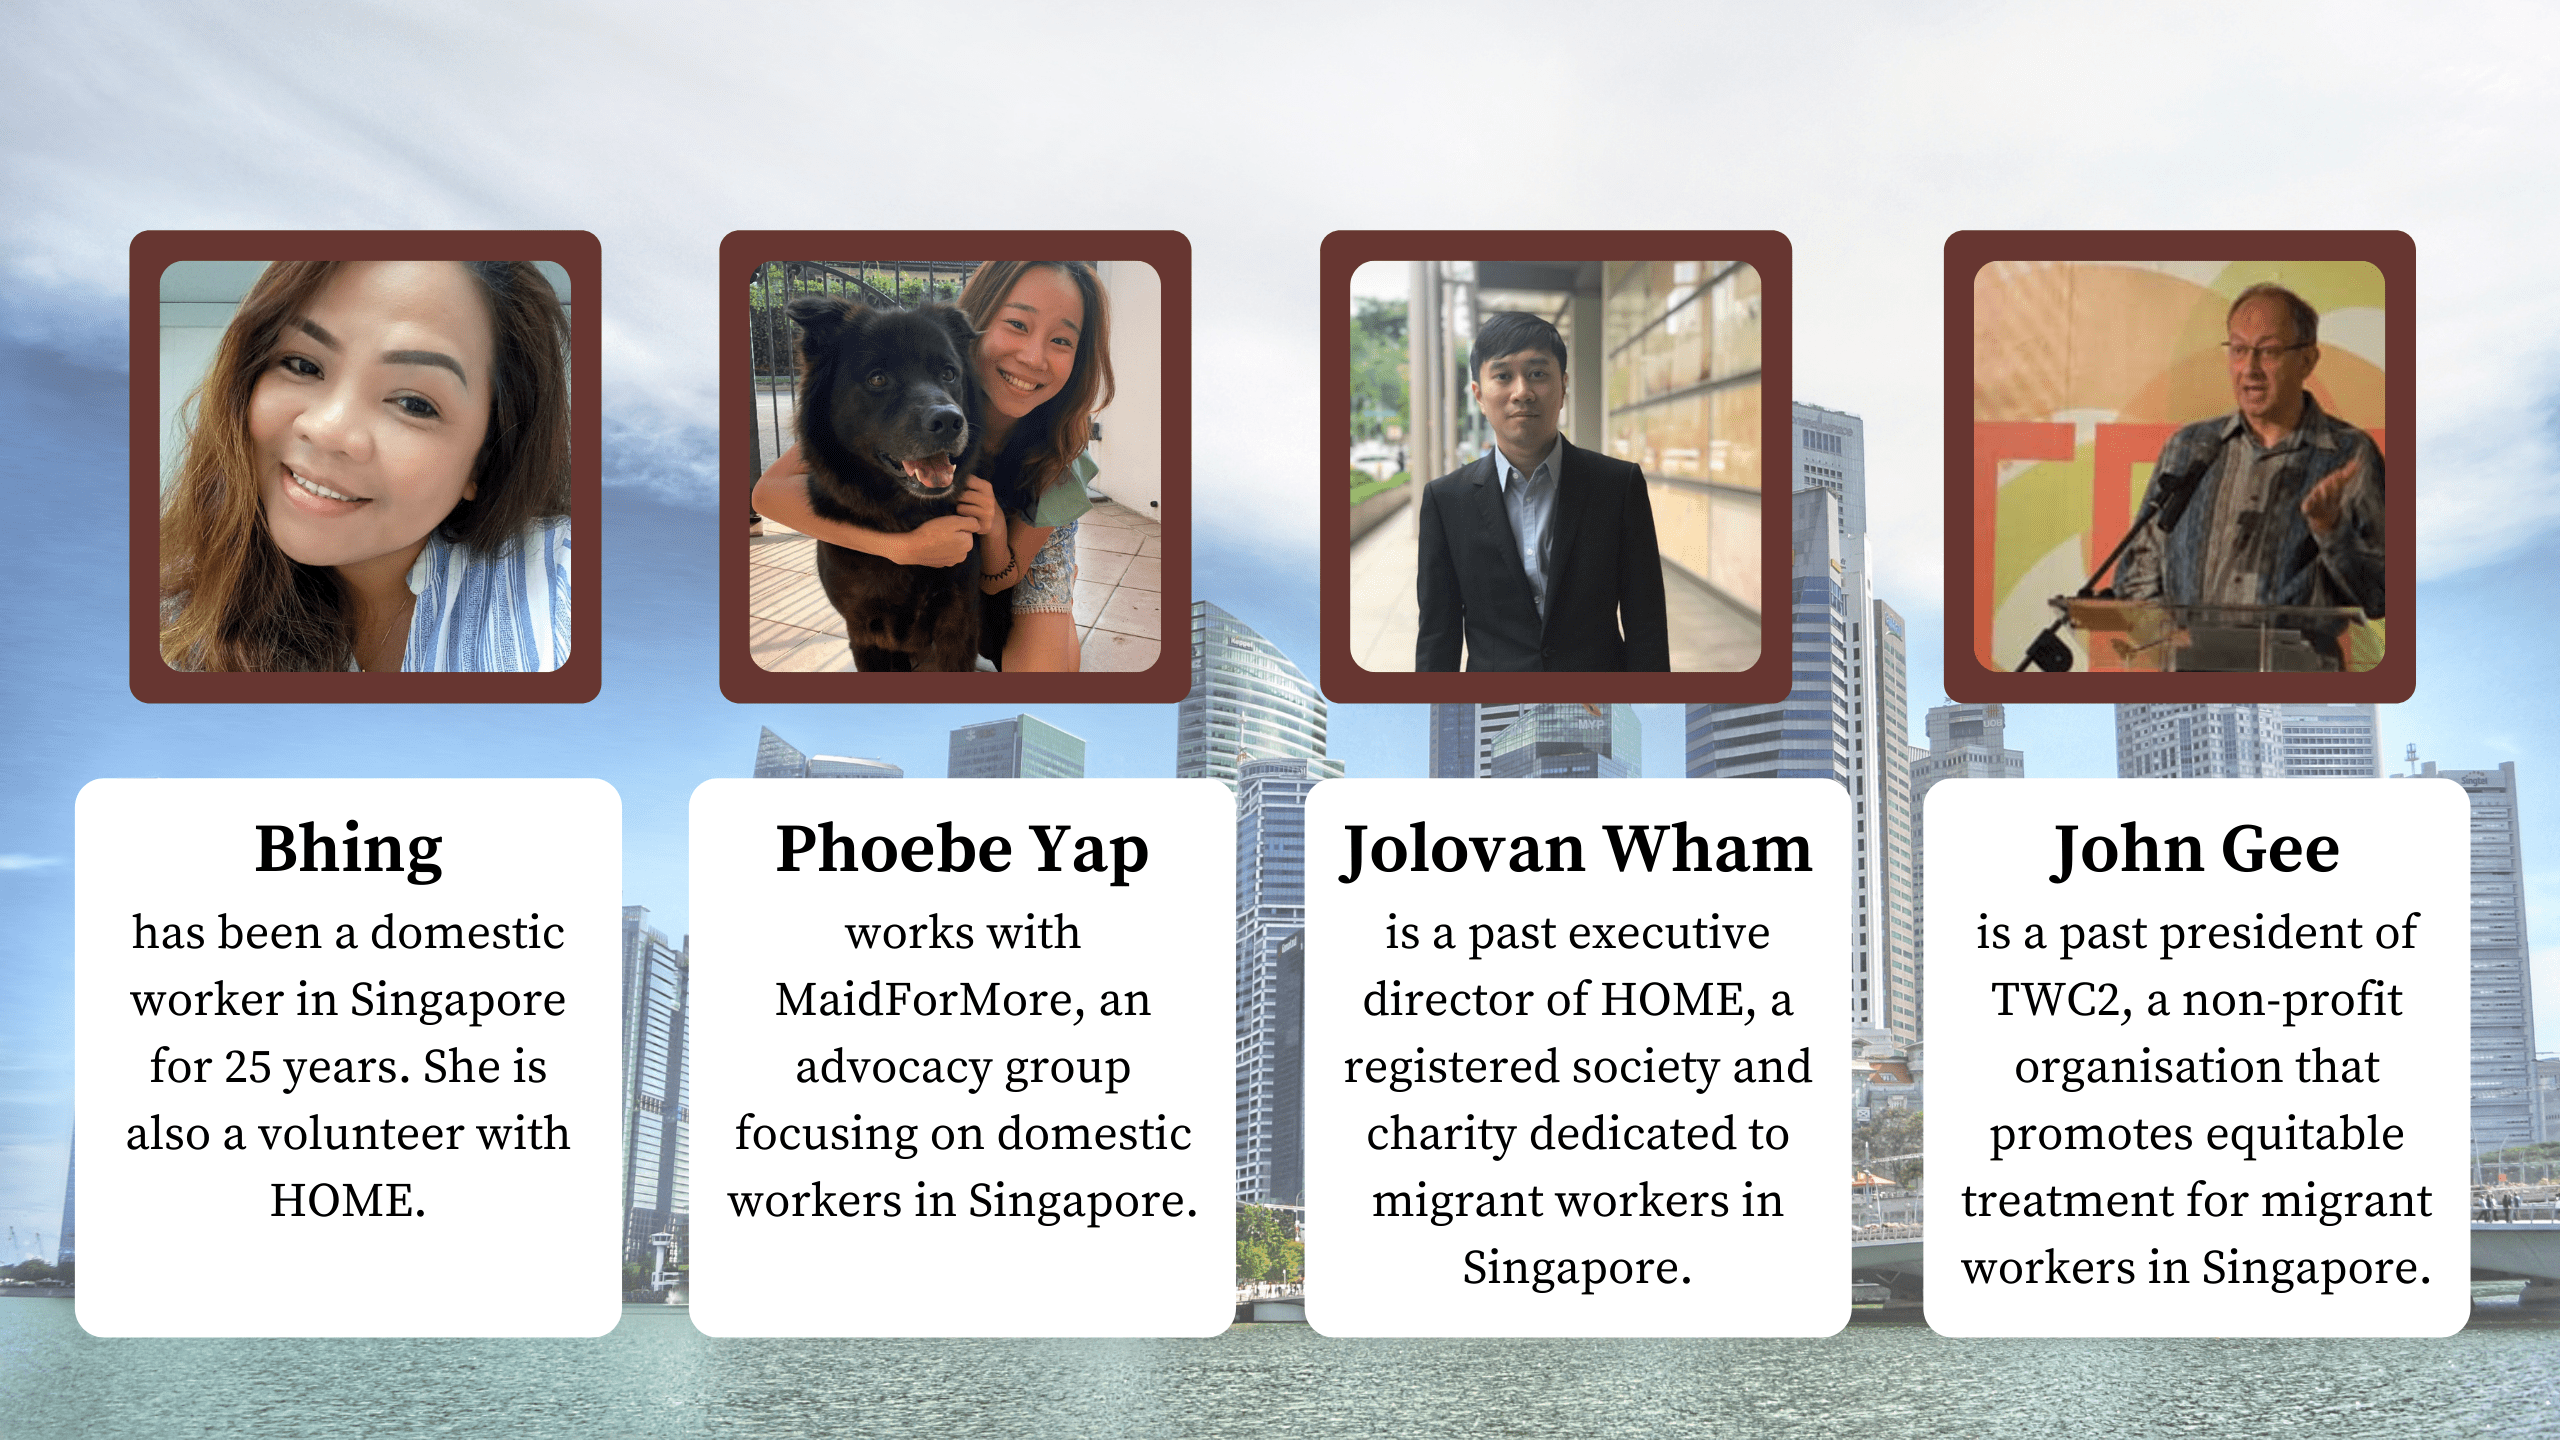 The 4 Profiles of the Changemakers we interviewed.